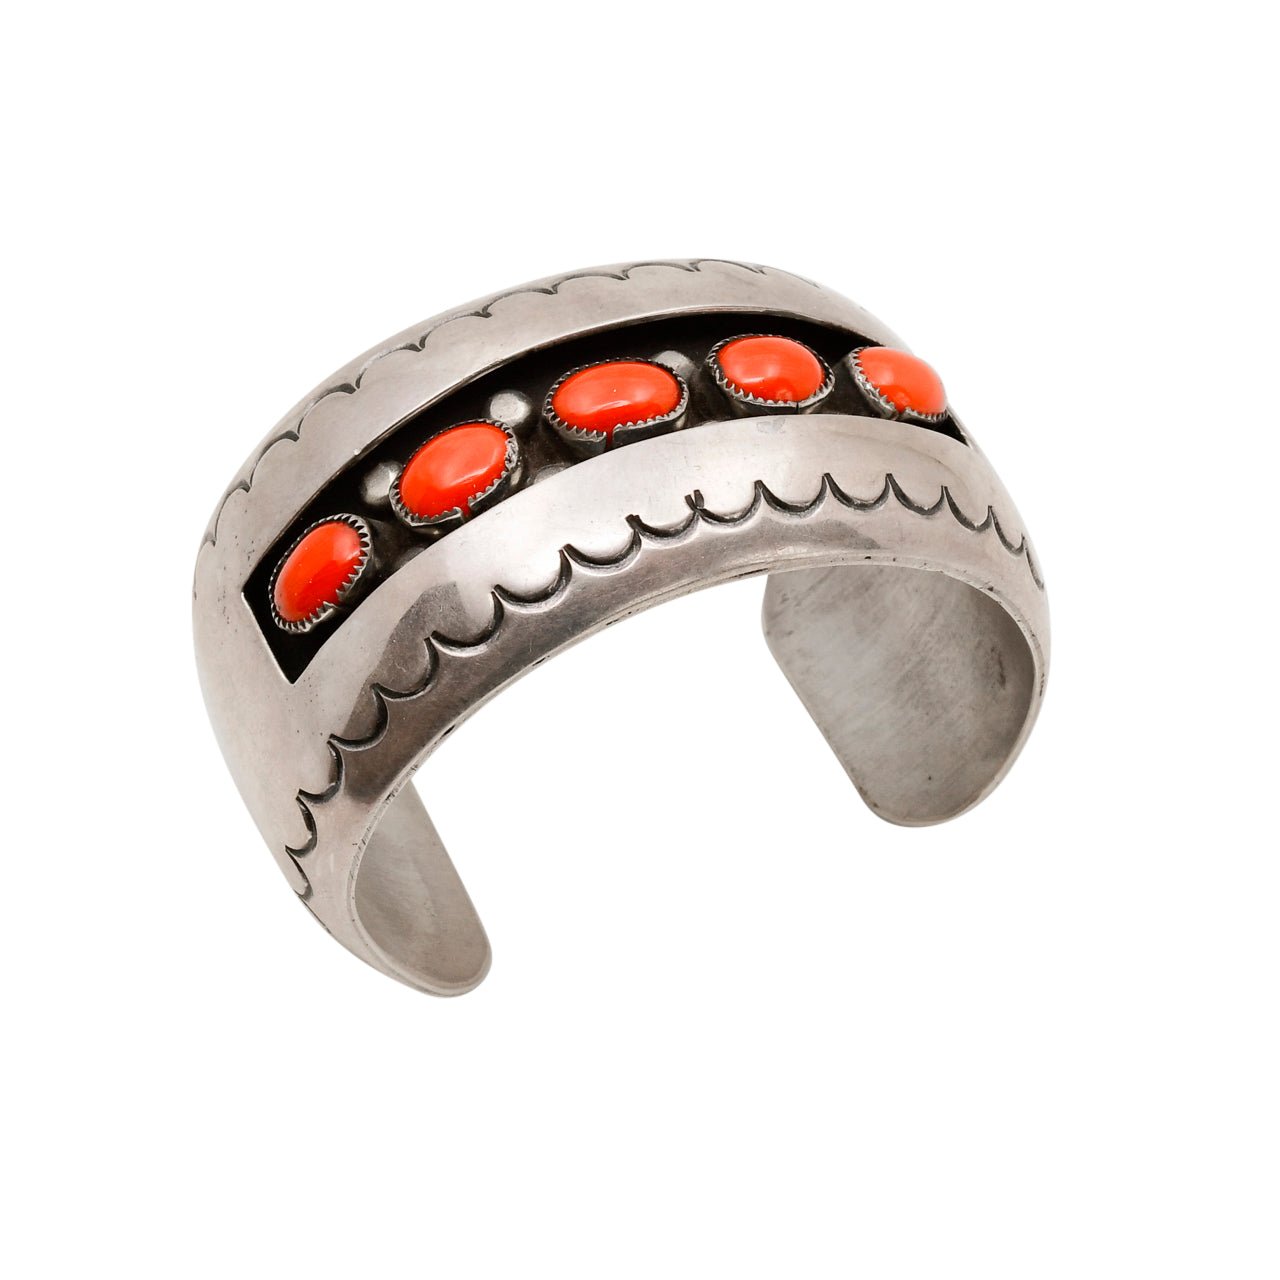 Vintage Navajo Hollow Form Shadow Box Bracelet With Red Coral - Turquoise & Tufa